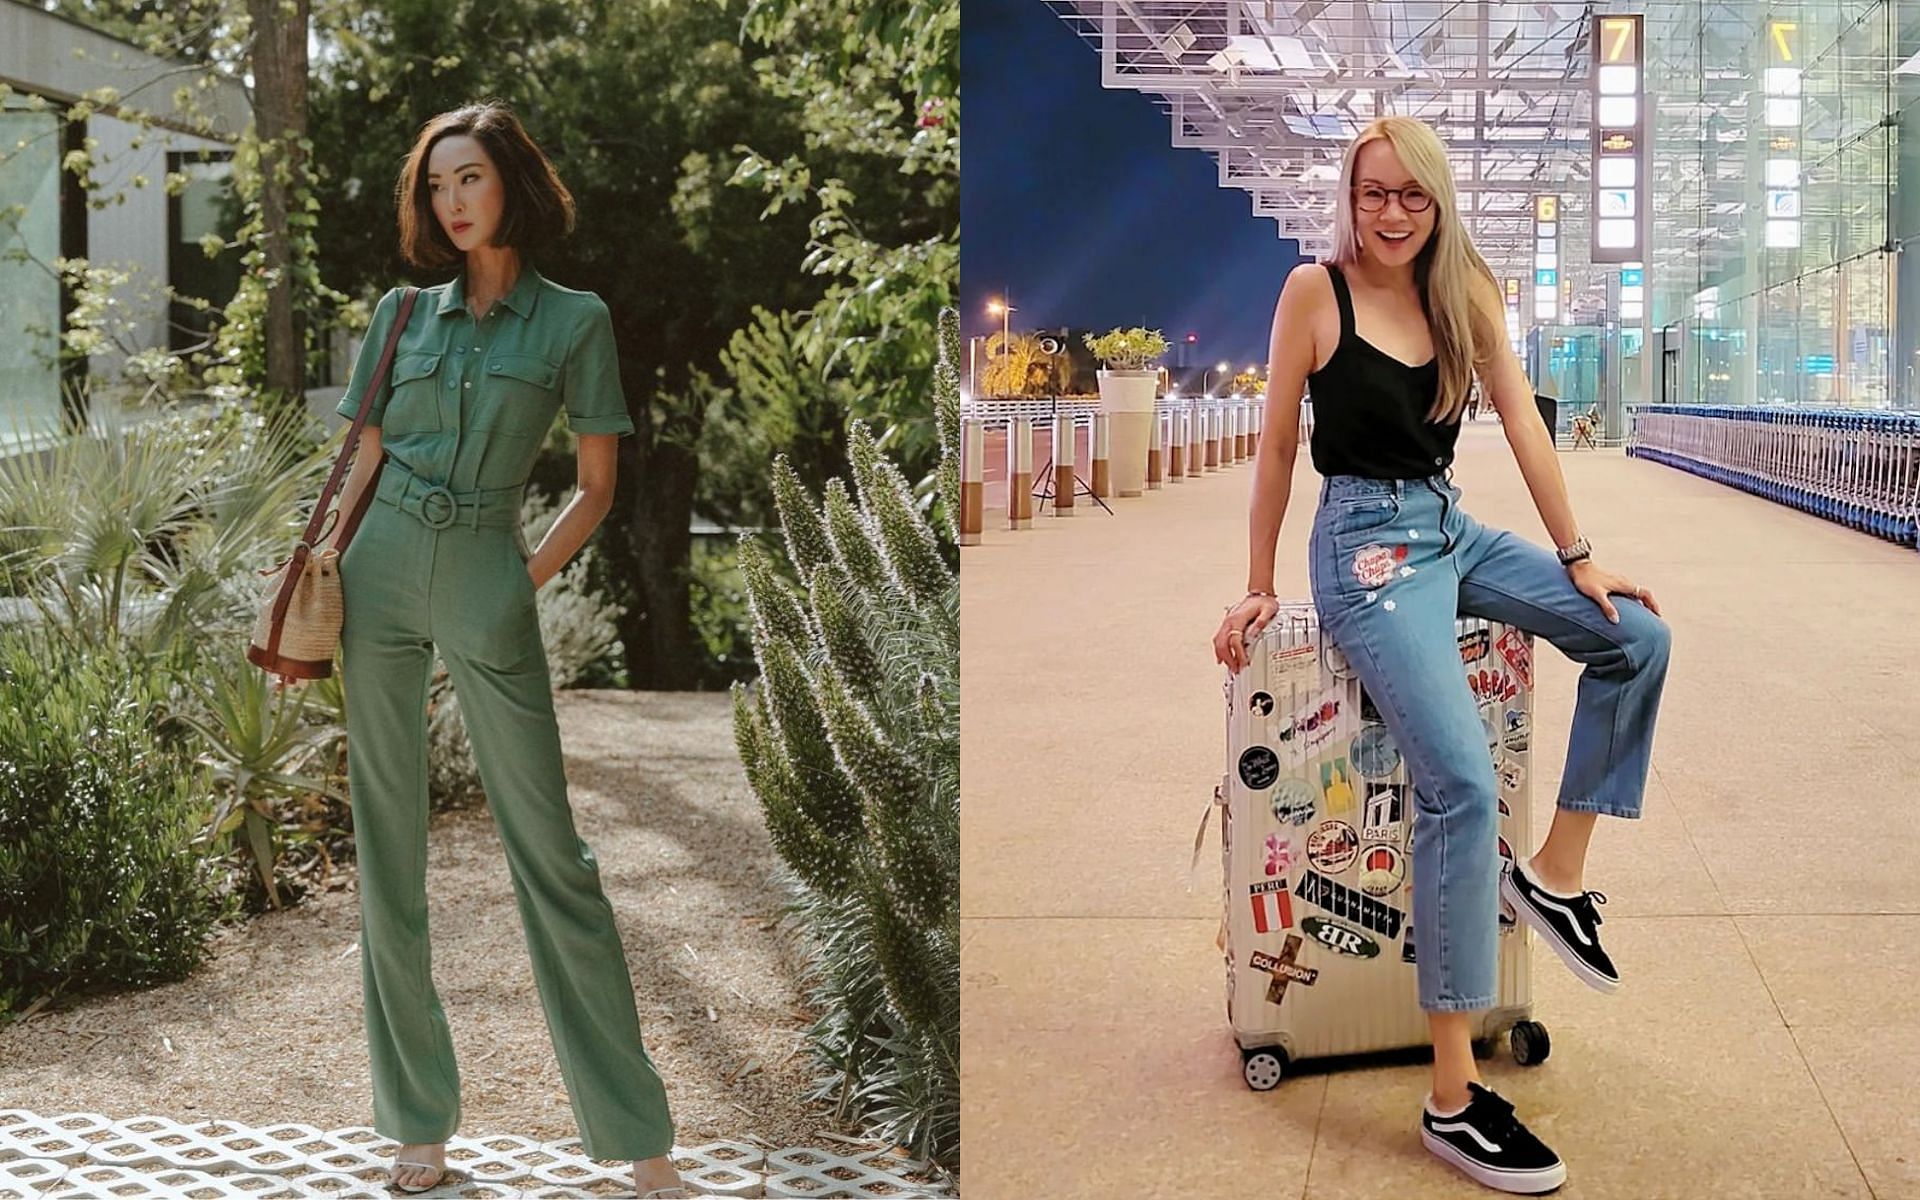 Stylish & Inspiring Airport Outfits for Your Next Trip